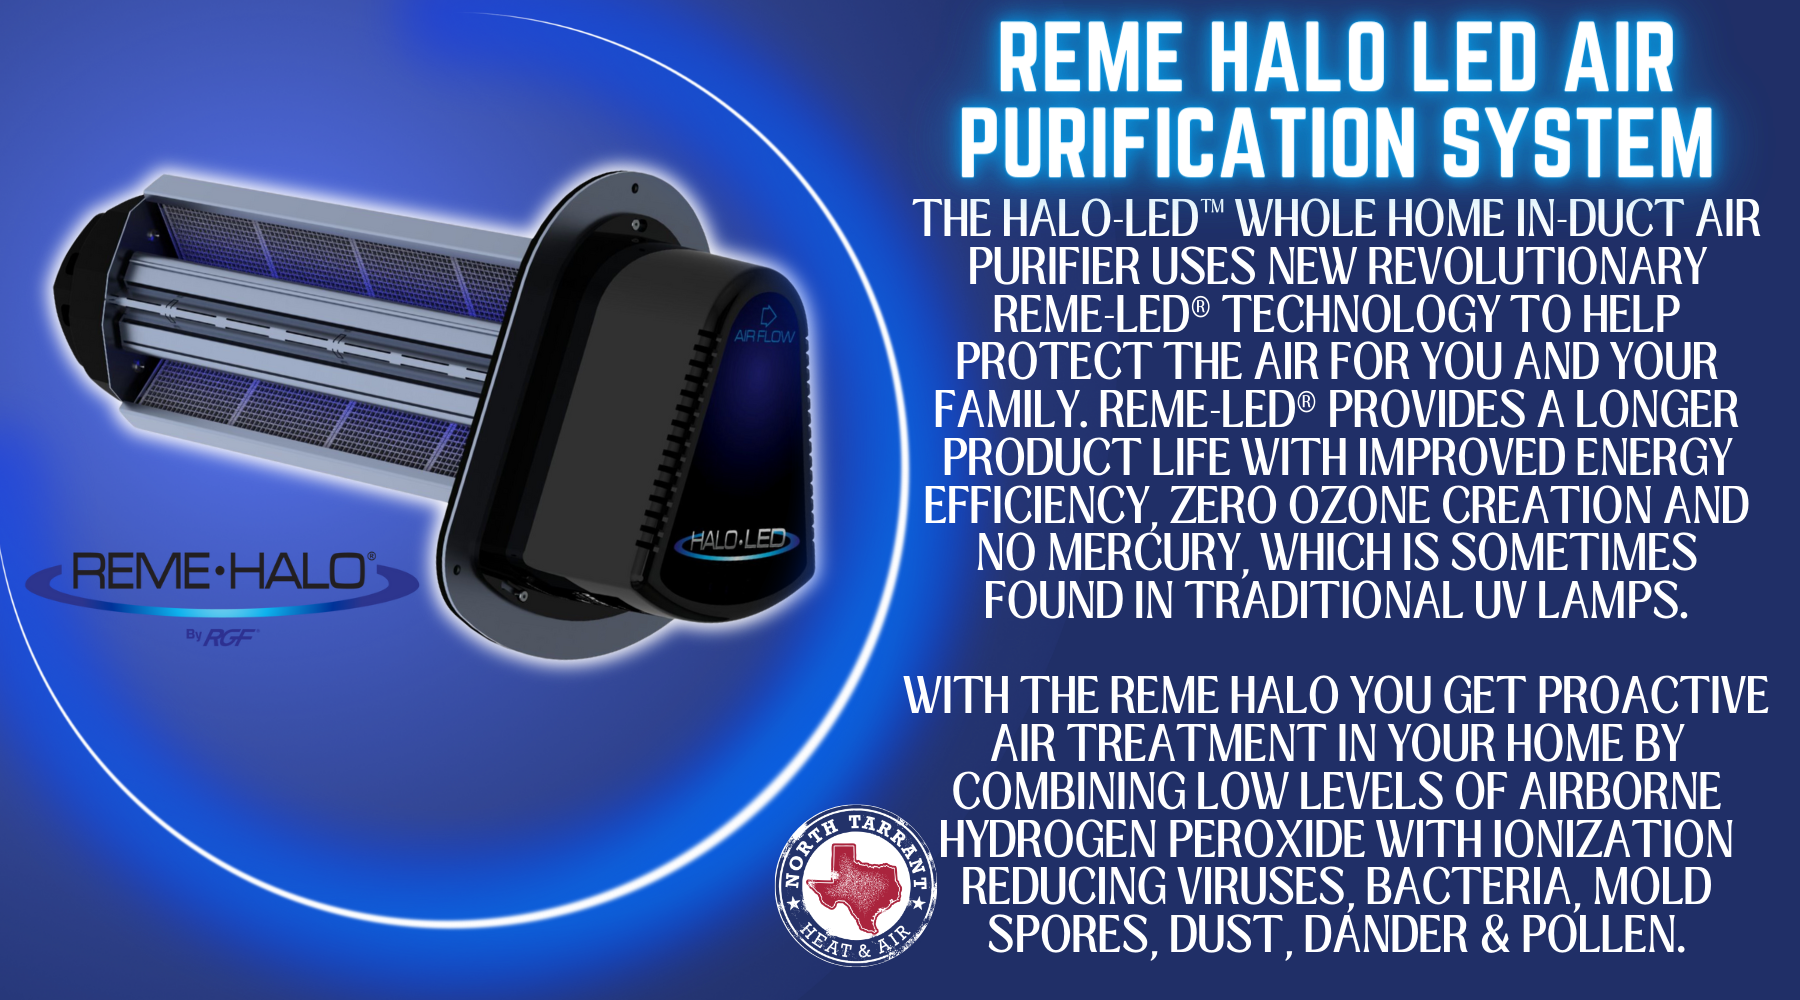 The HALO-LED™ Whole Home In-Duct Air Purifier uses new revolutionary REME-LED® technology to help protect the air for you and your family. REME-LED® provides a longer product life with improved energy efficiency, zero ozone creation and no mercury, which is sometimes found in traditional UV lamps. With the reme halo You get proactive air treatment in your home by combining low levels of airborne hydrogen peroxide with ionization reducing viruses, bacteria, mold spores, dust, dander & pollen.